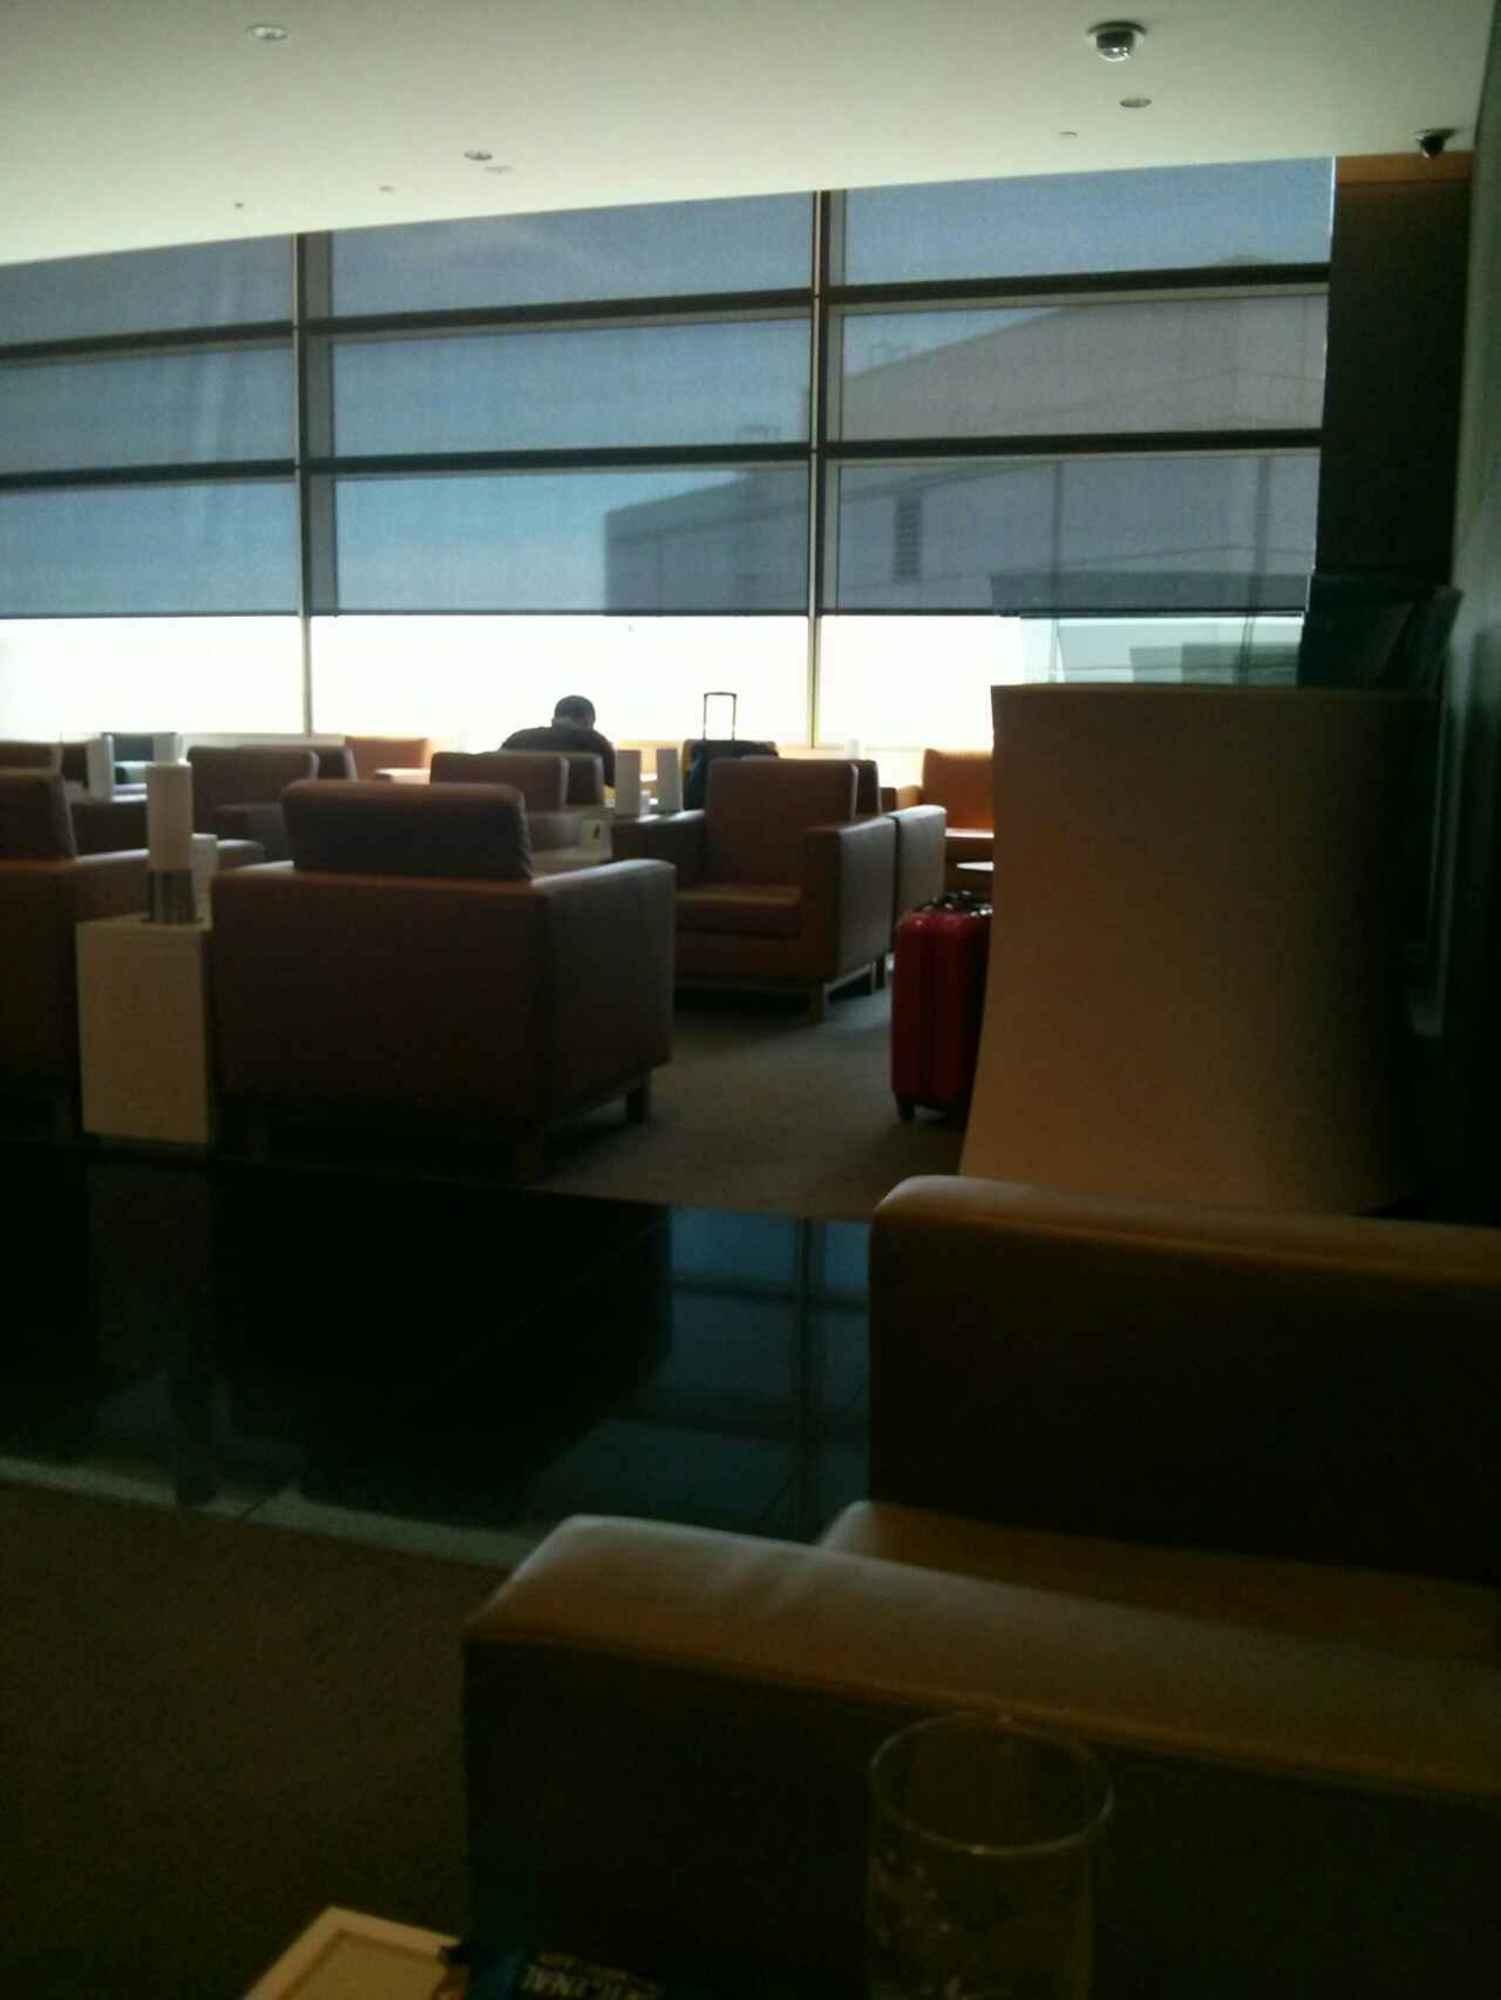 Cathay Pacific First and Business Class Lounge image 21 of 74